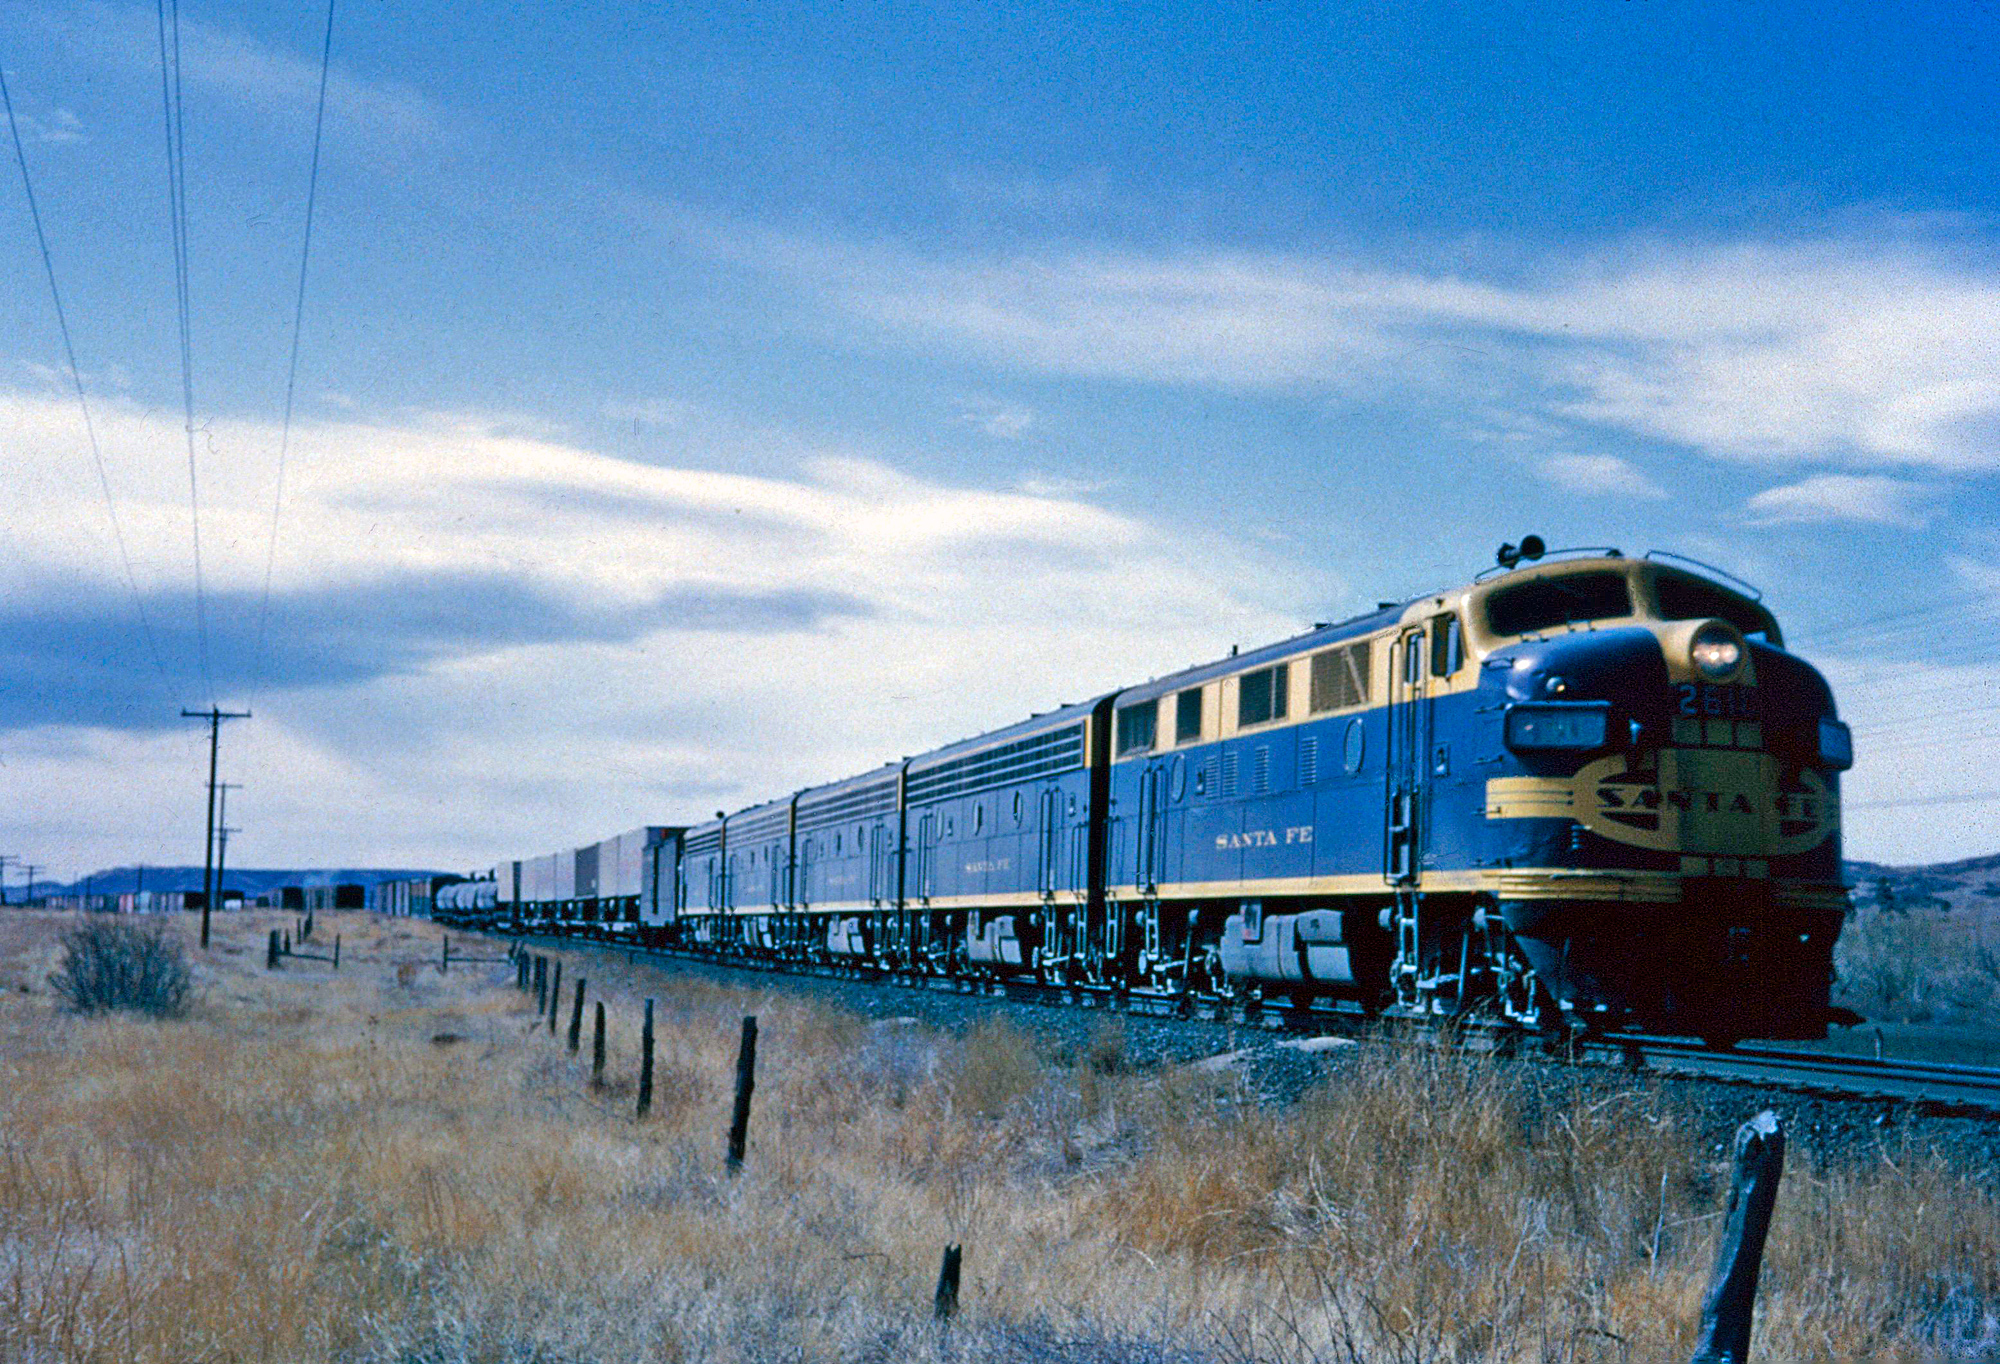 UP: From Steam to Green: The History and Evolution of Locomotives